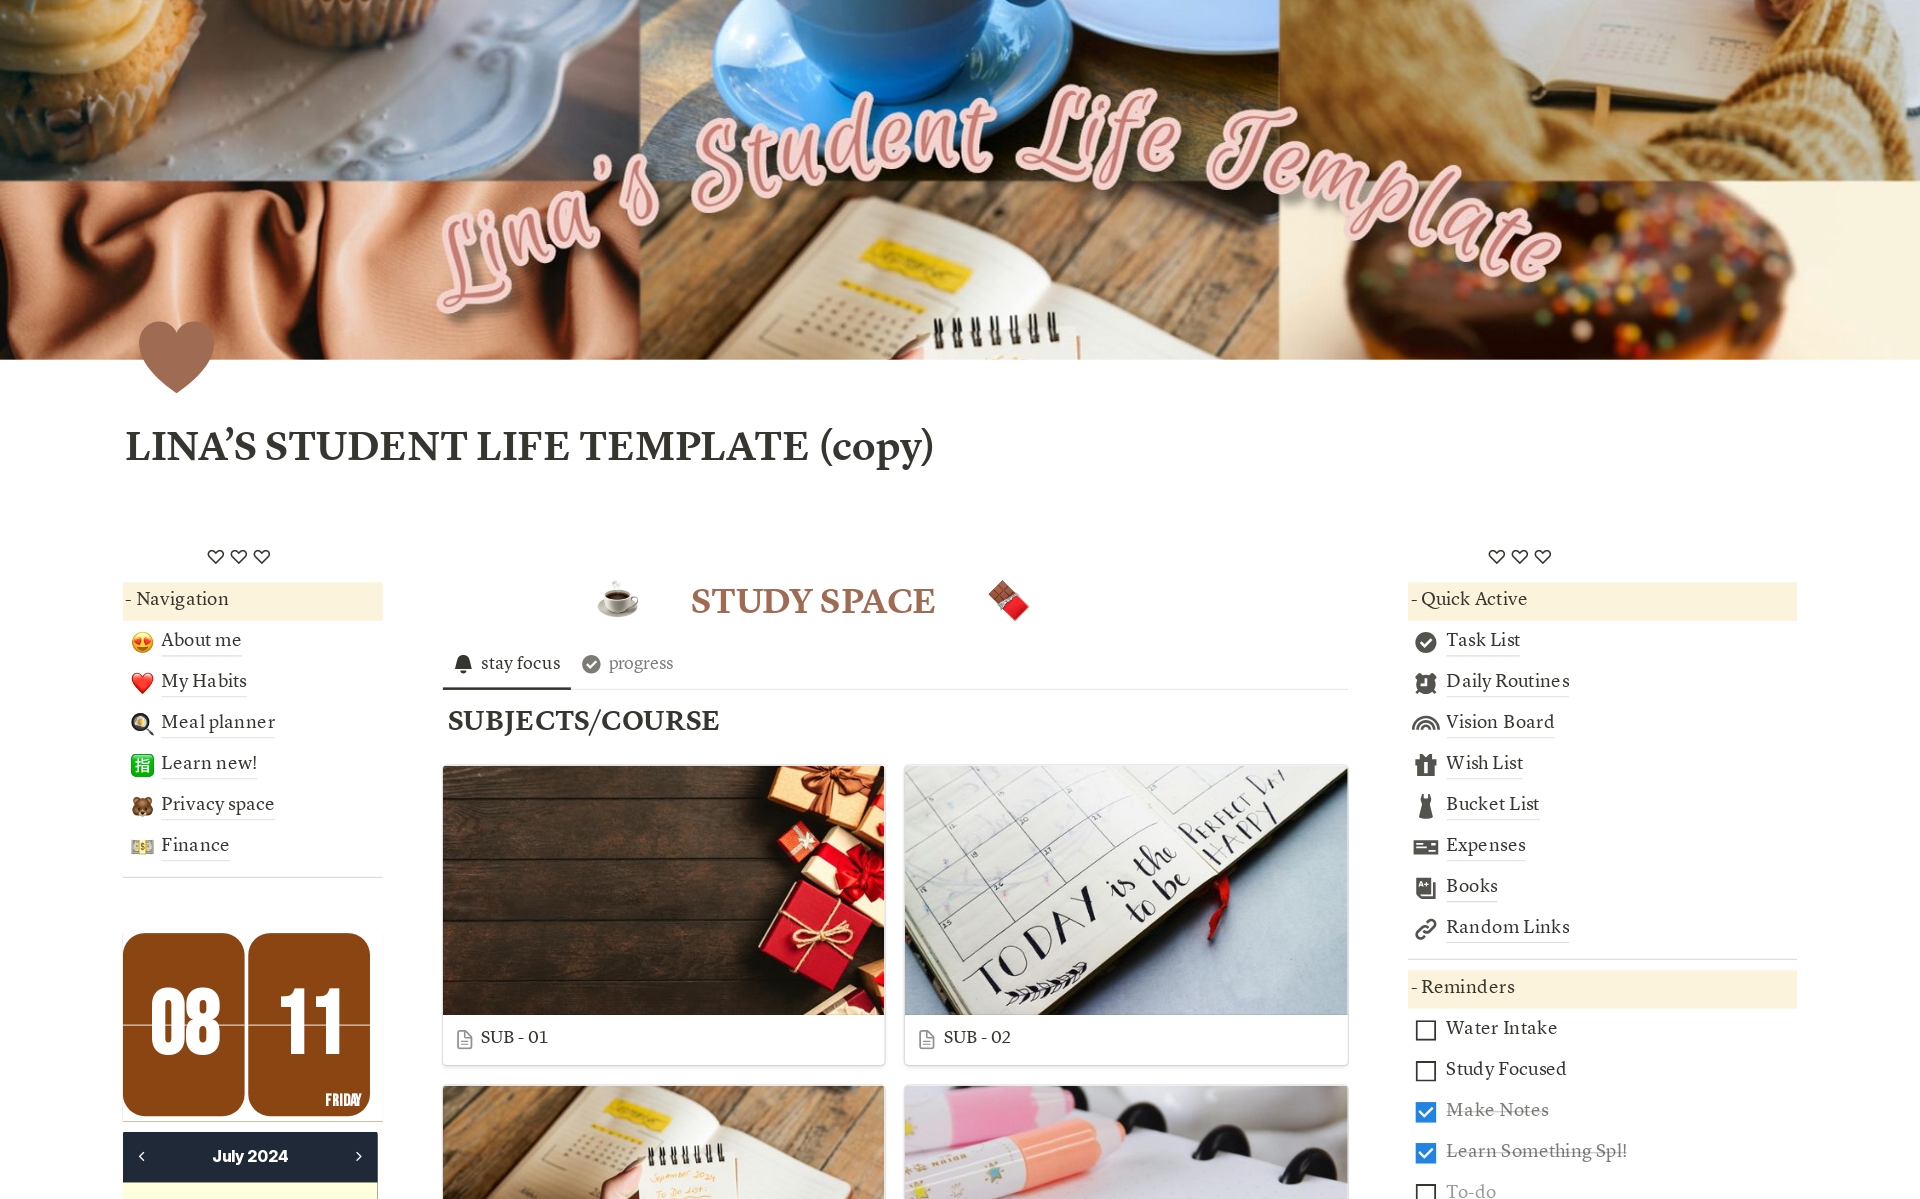 Introducing the LINA STUDENT LIFE TEMPLATE - Your Ultimate Companion For Organizing And Optimizing Your Academic Journey With Aesthetic Style And Simplicity.